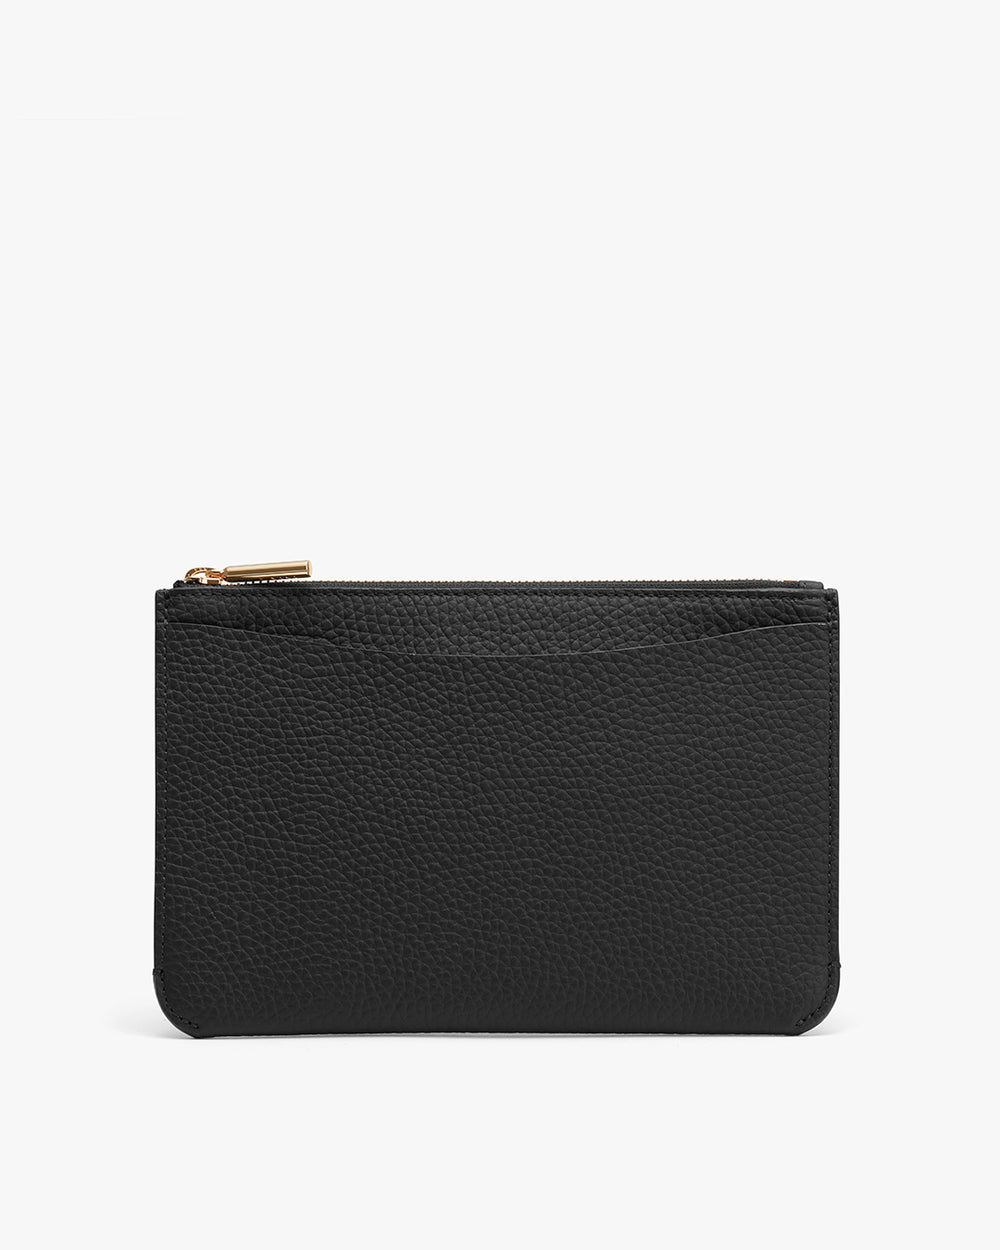 Large Leather Zipper Pouch